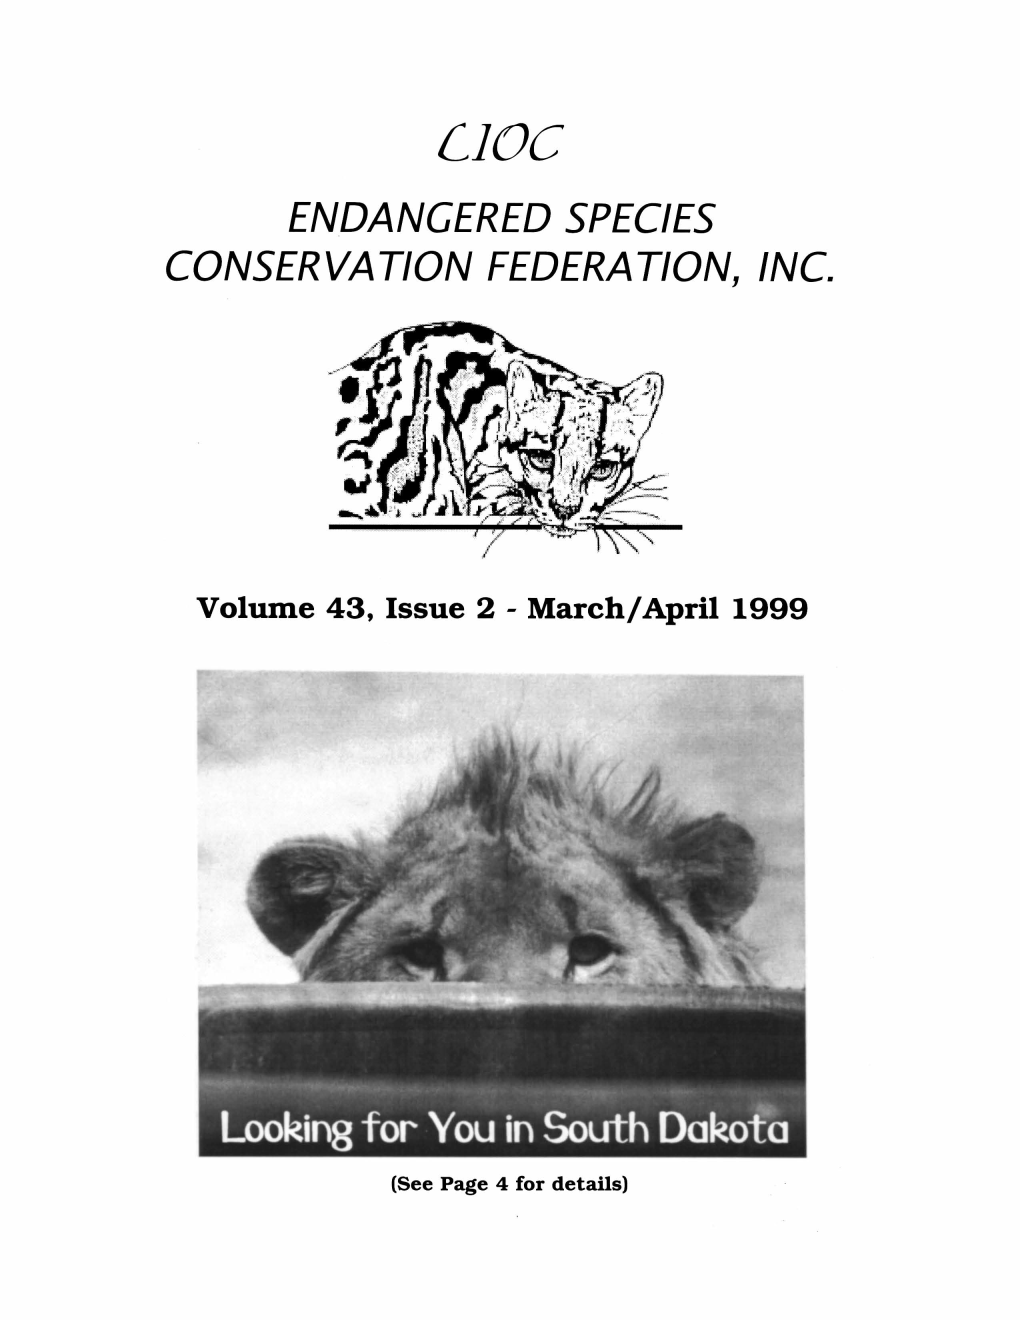 Fifteen Endangered Species Threatened by INS Project